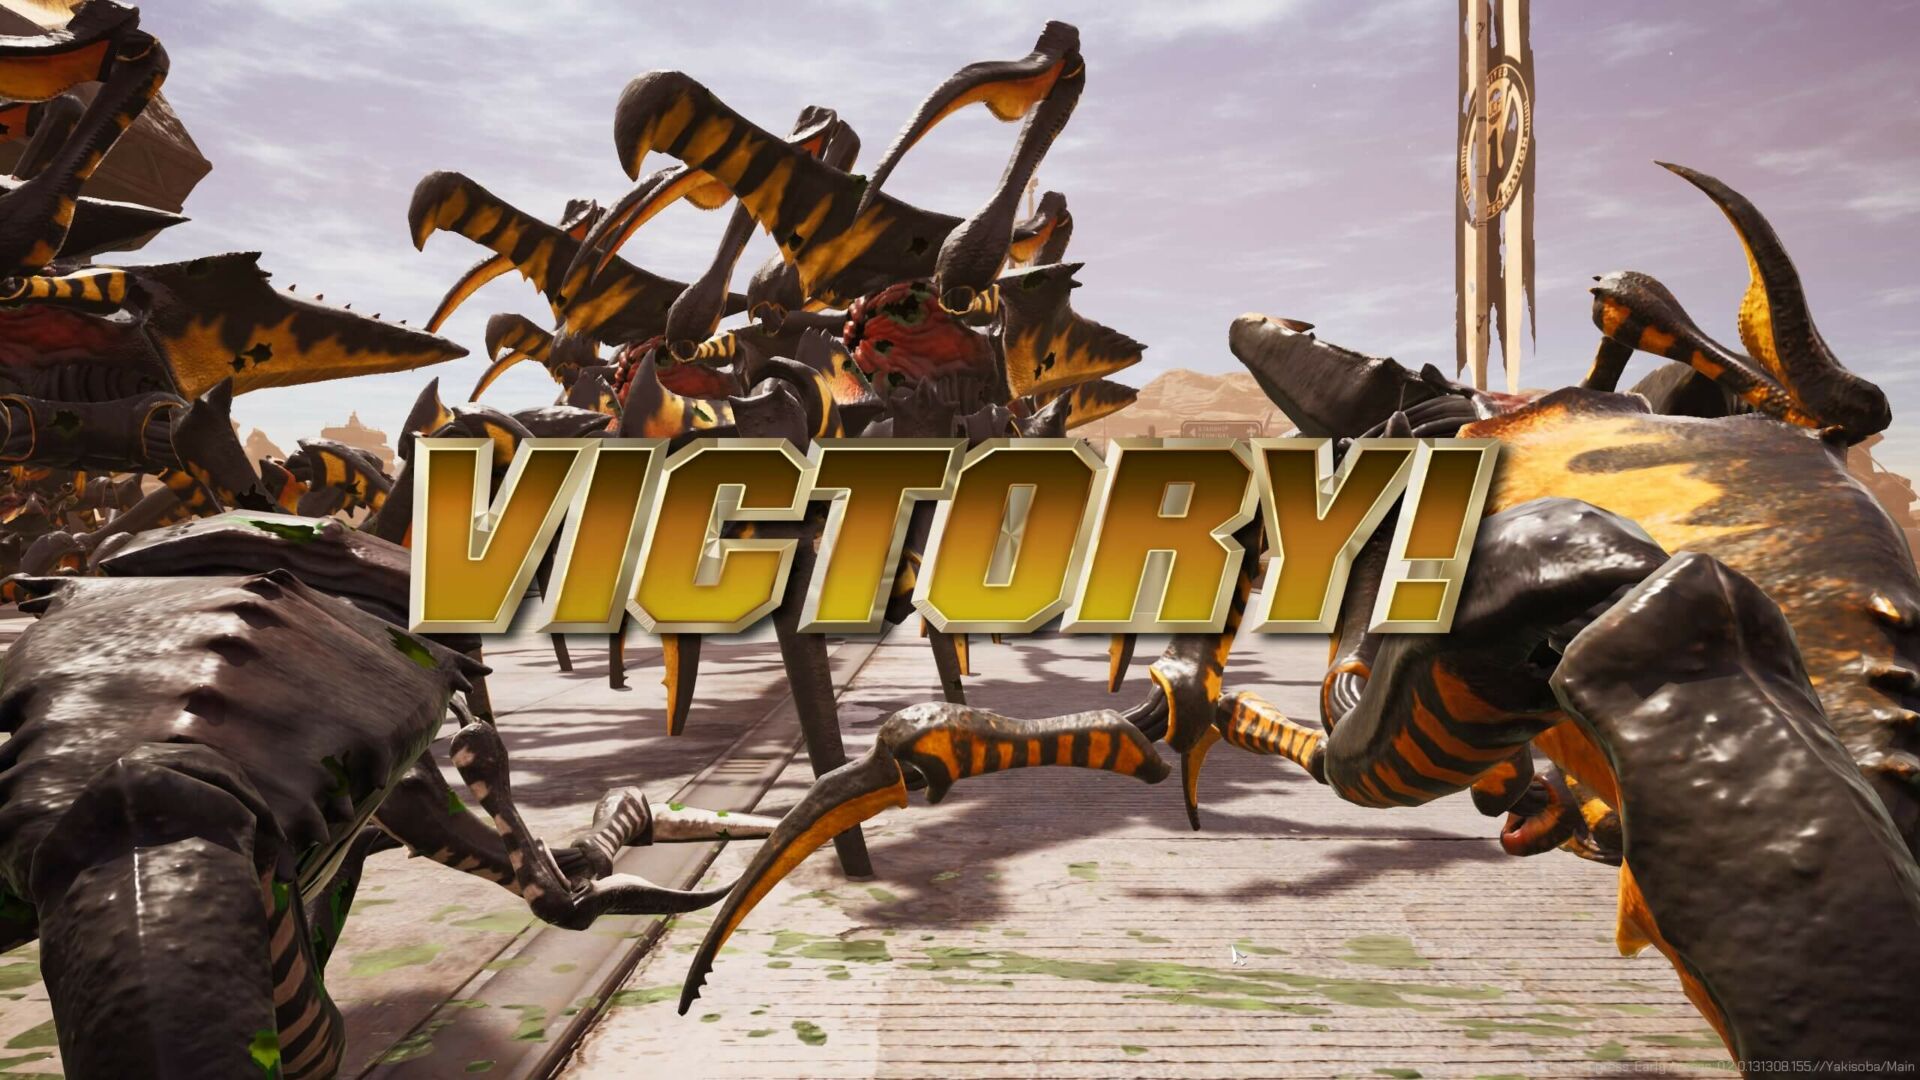 Starship Troopers Extermination Victory